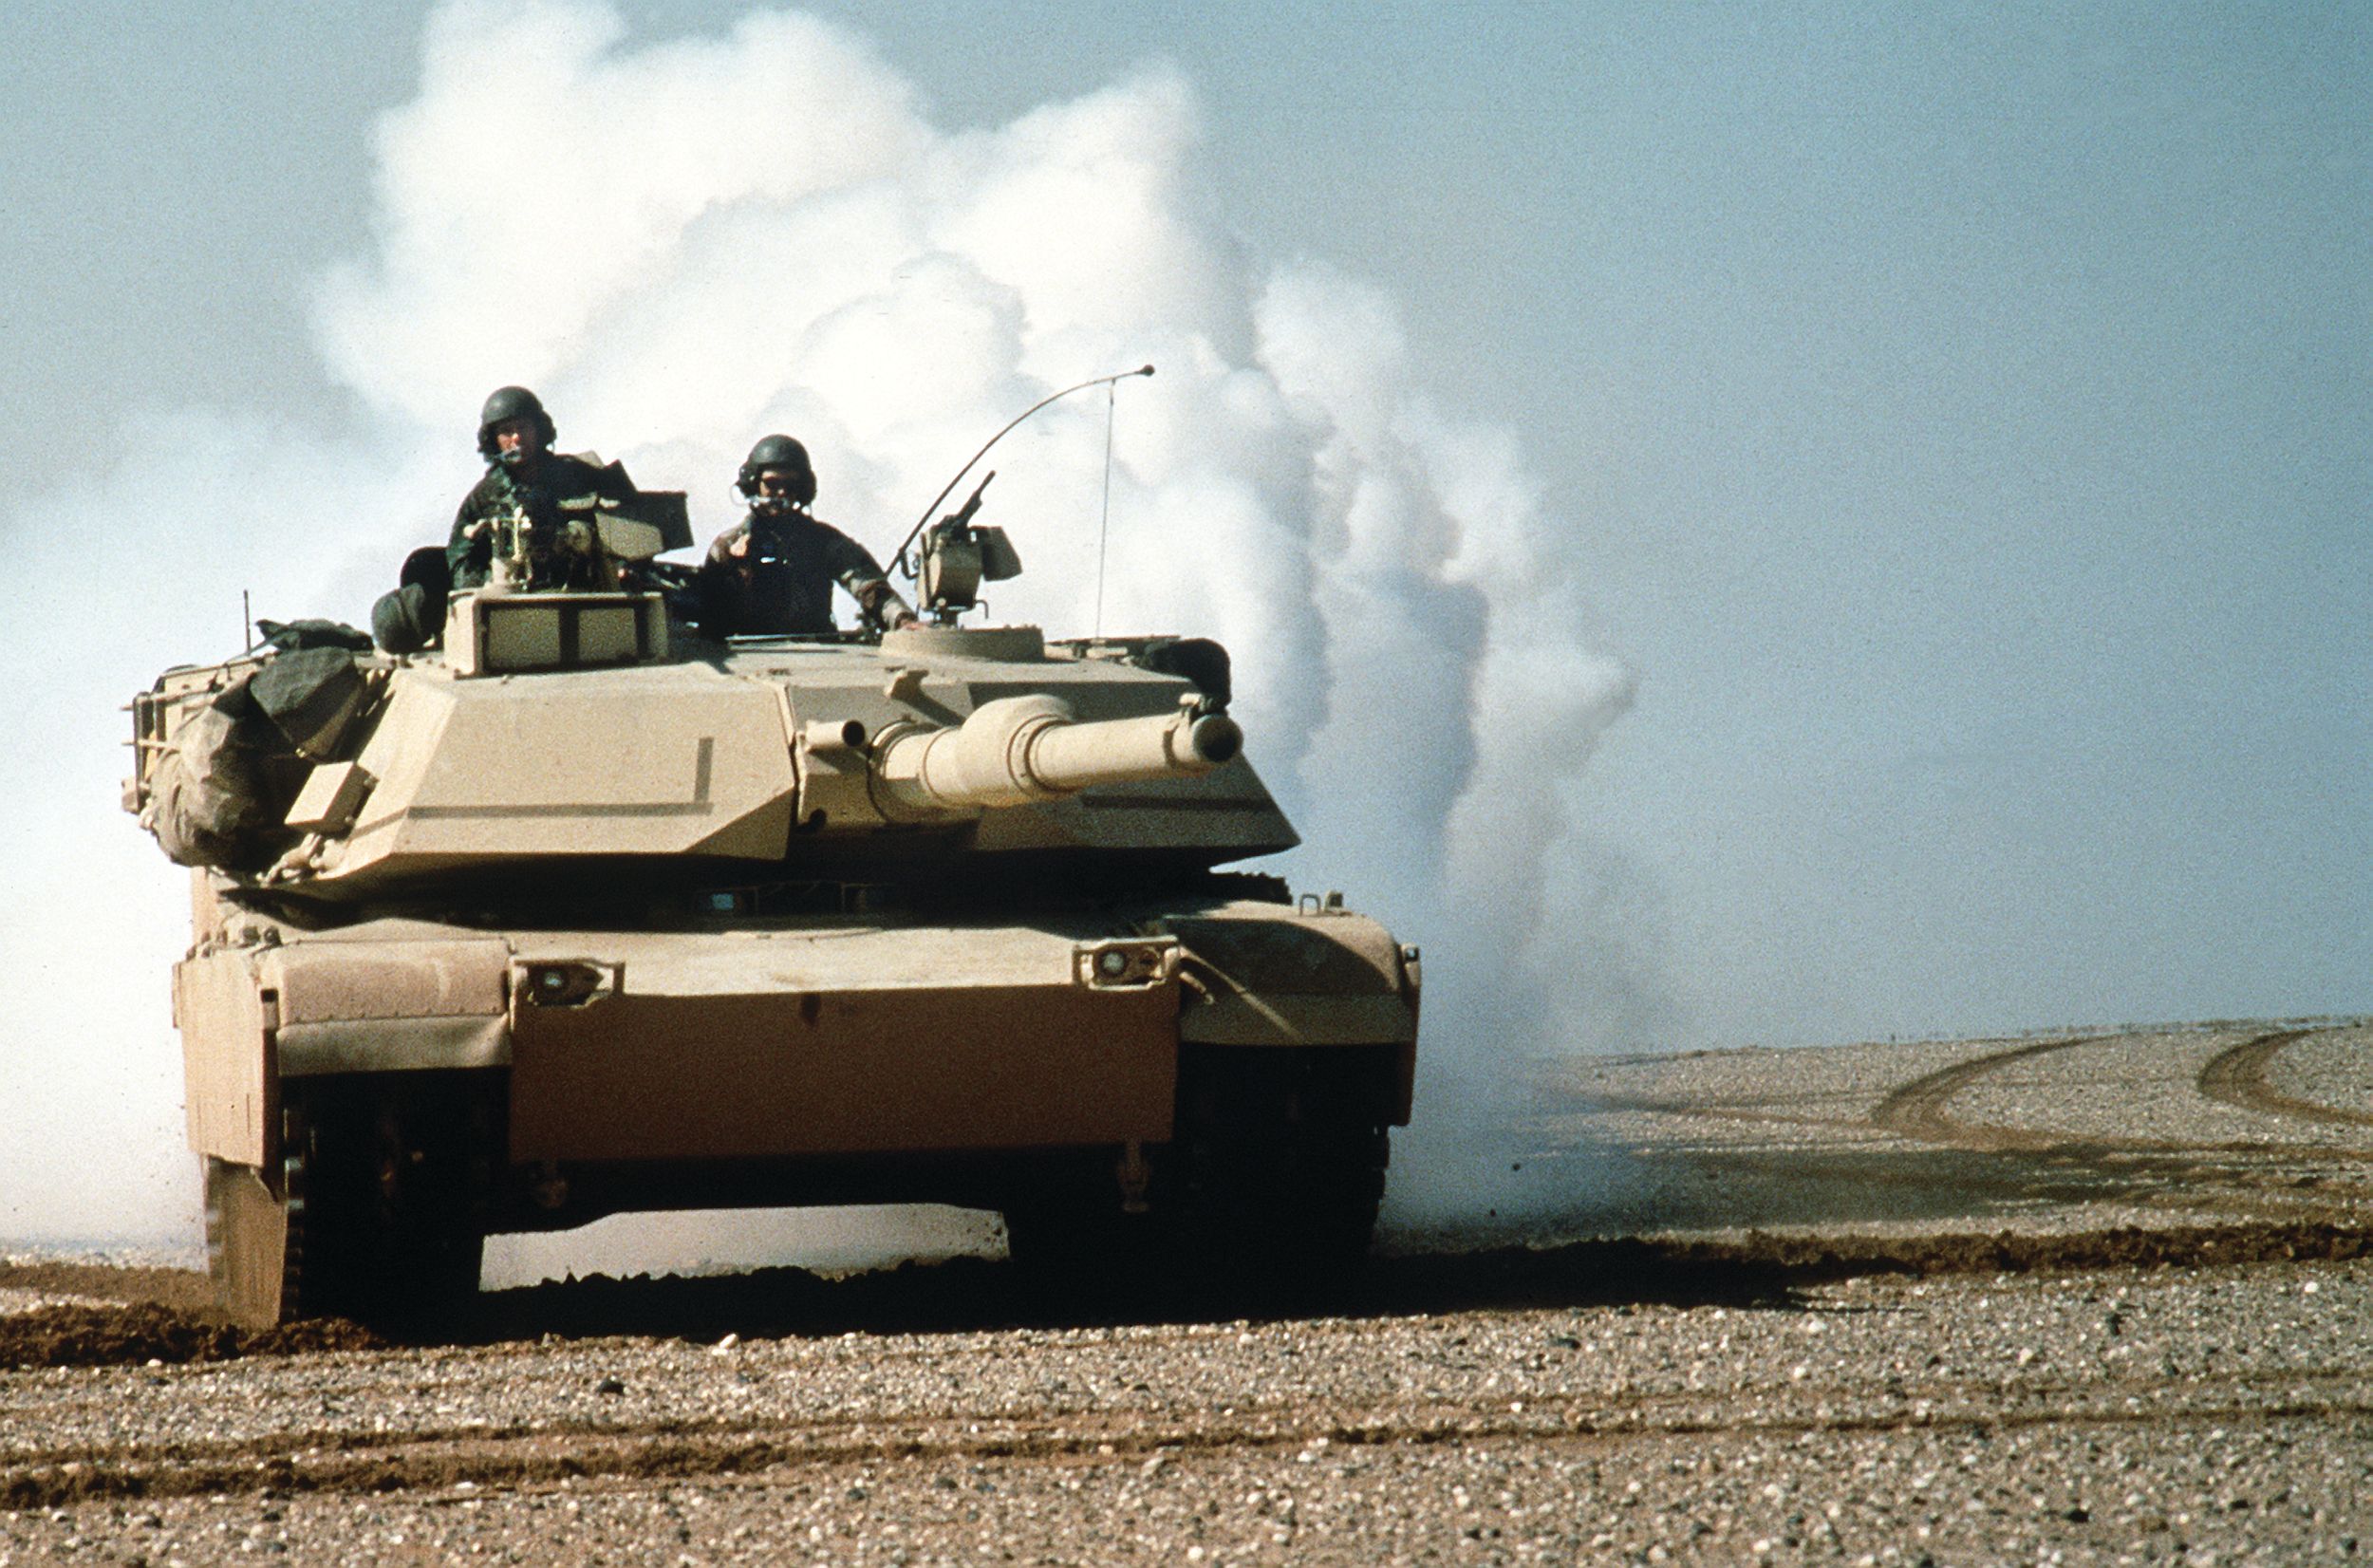 The M1A1 Abrams main battle tank performed exceedingly well during the Gulf War. The presence of the fearsome tanks, which knocked out large numbers of Iraqi tanks, compelled many Iraqi soldiers to lay down their arms. 